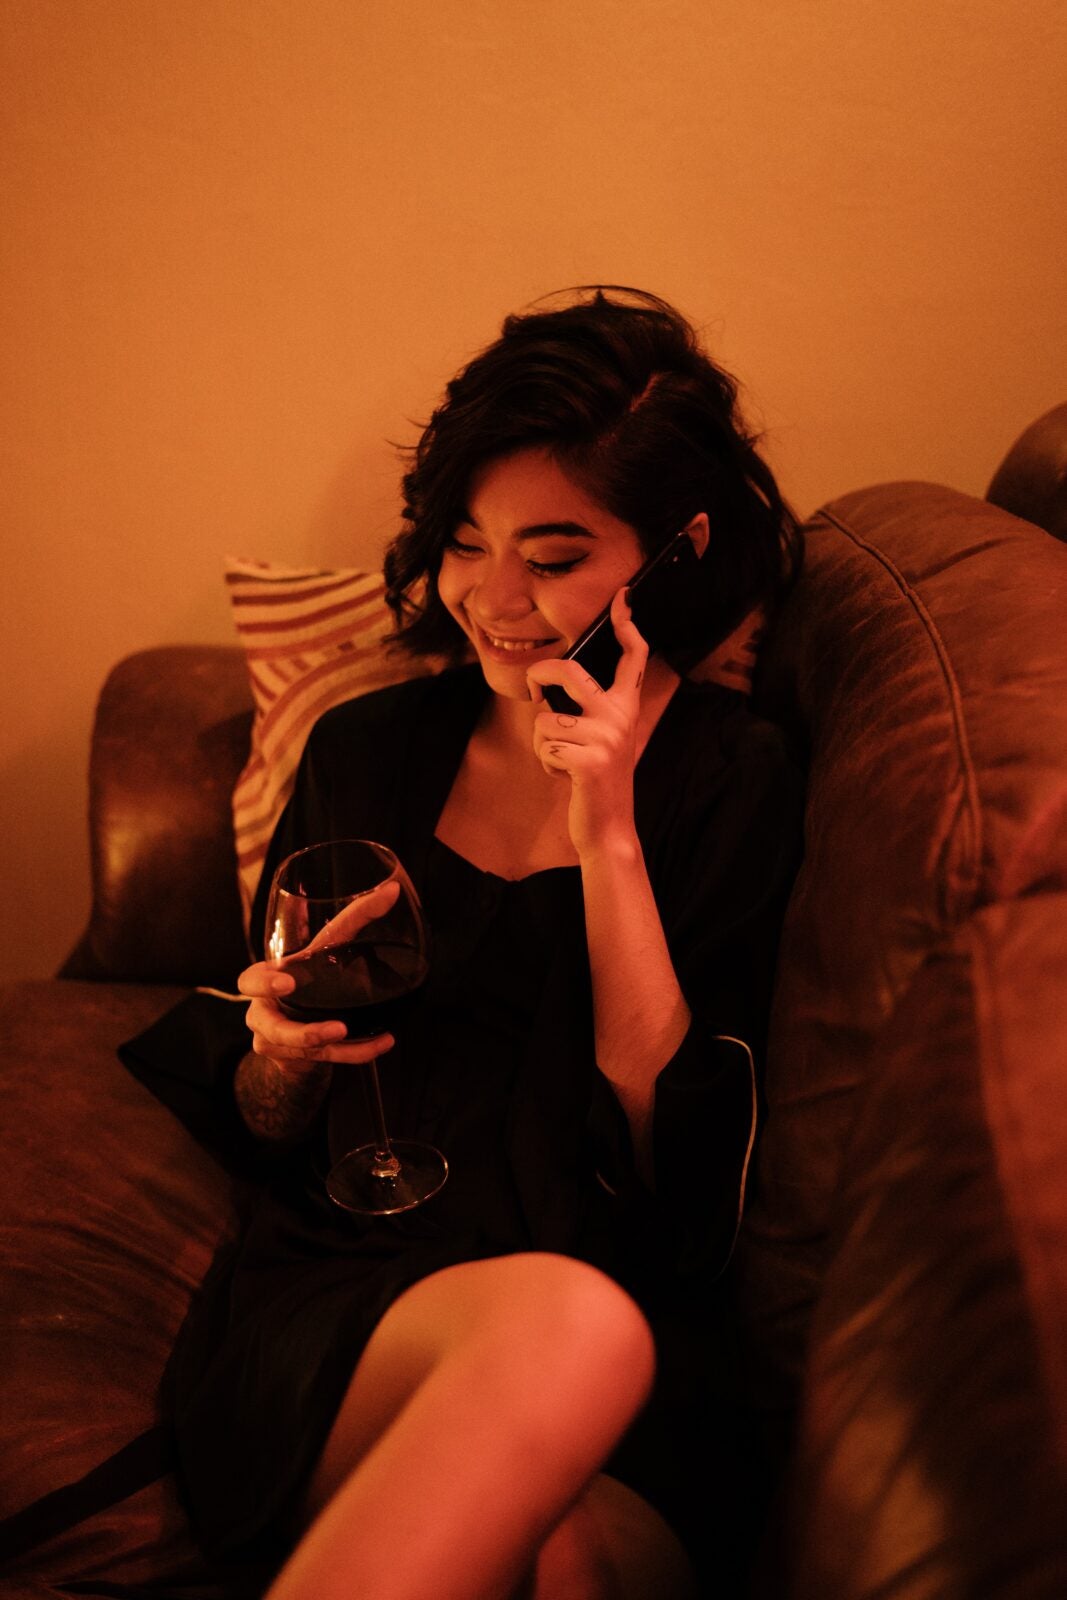 Young woman with short hair holding a wine glass and talking on the phone.